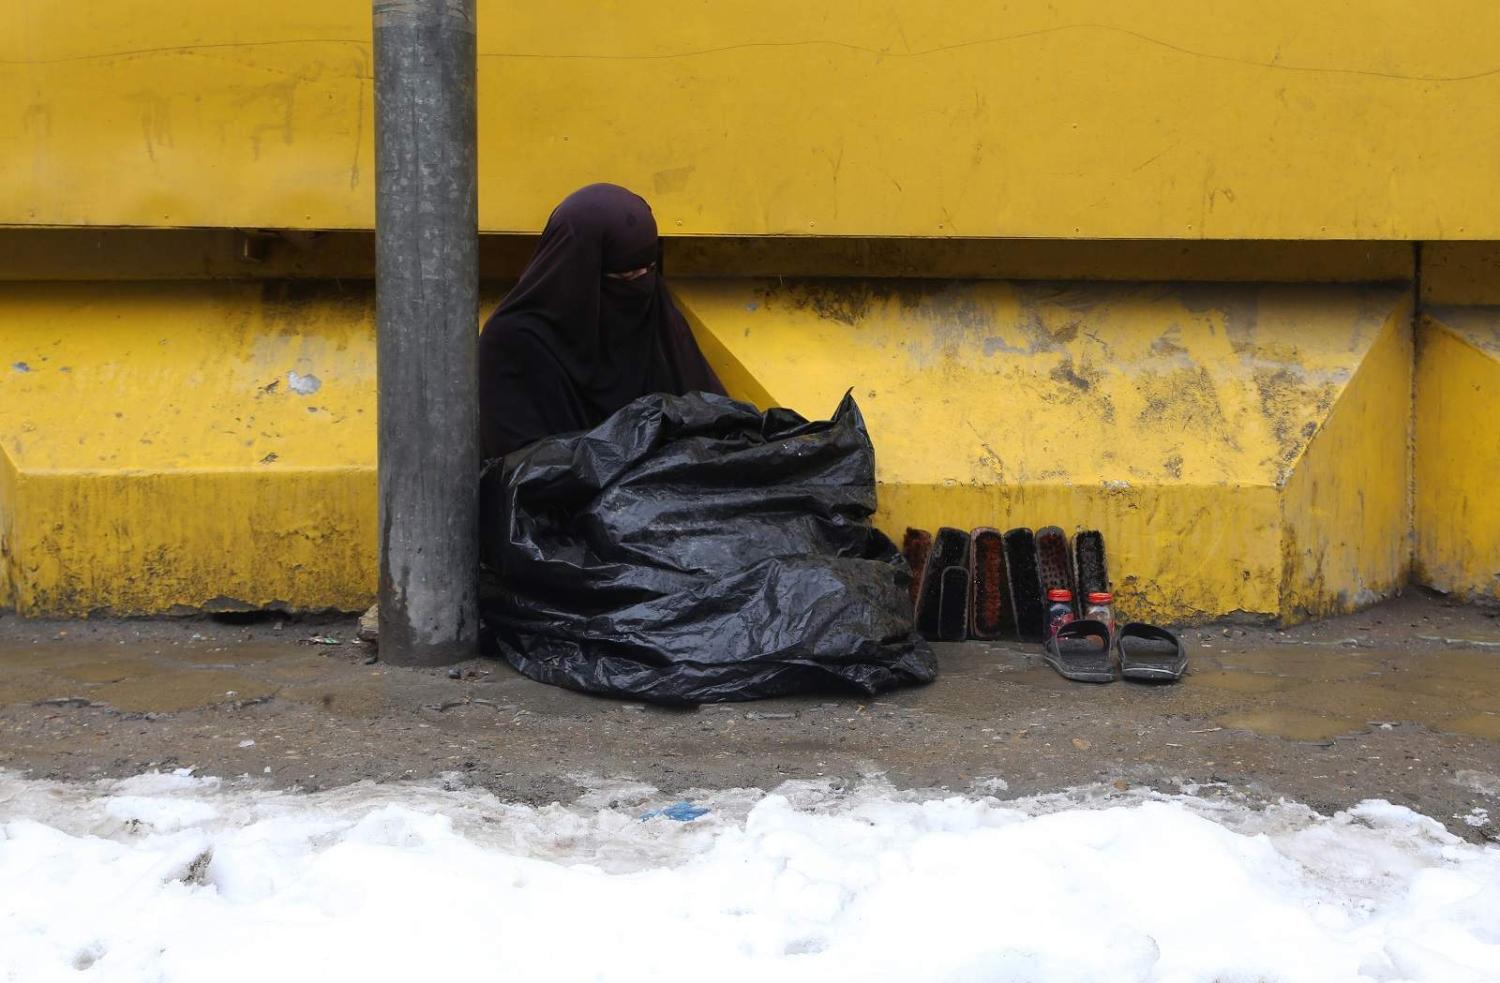 Almost 97 per cent of Afghans will live below the poverty line by the end of 2022. Kabul, Afghanistan, 8 January 2022 (Bilal Guler/Anadolu Agency via Getty Images)